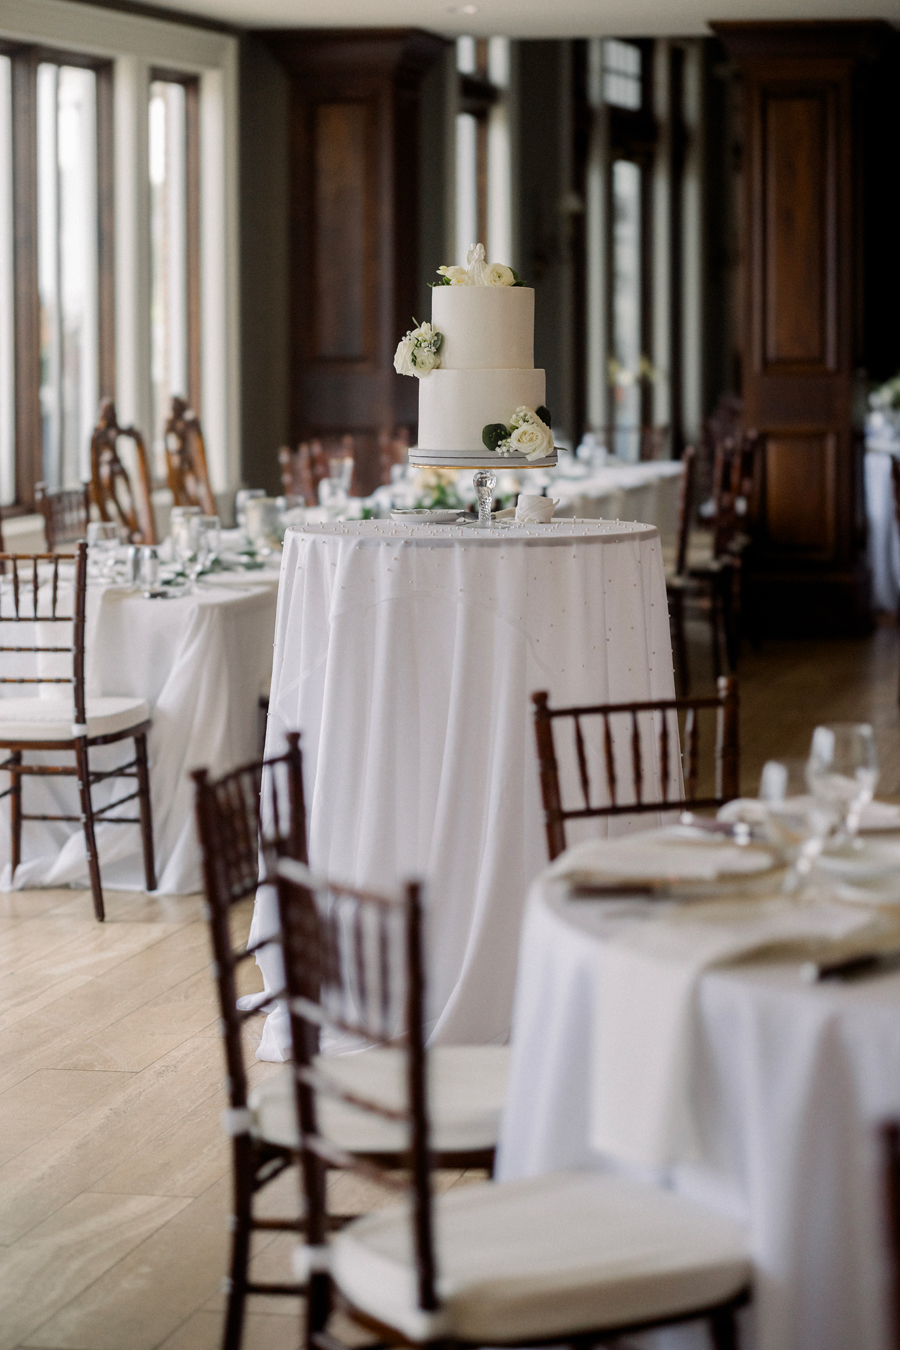 Reception details at the Club at Old Hawthorne for a Westminster College wedding by Love Tree Studios.